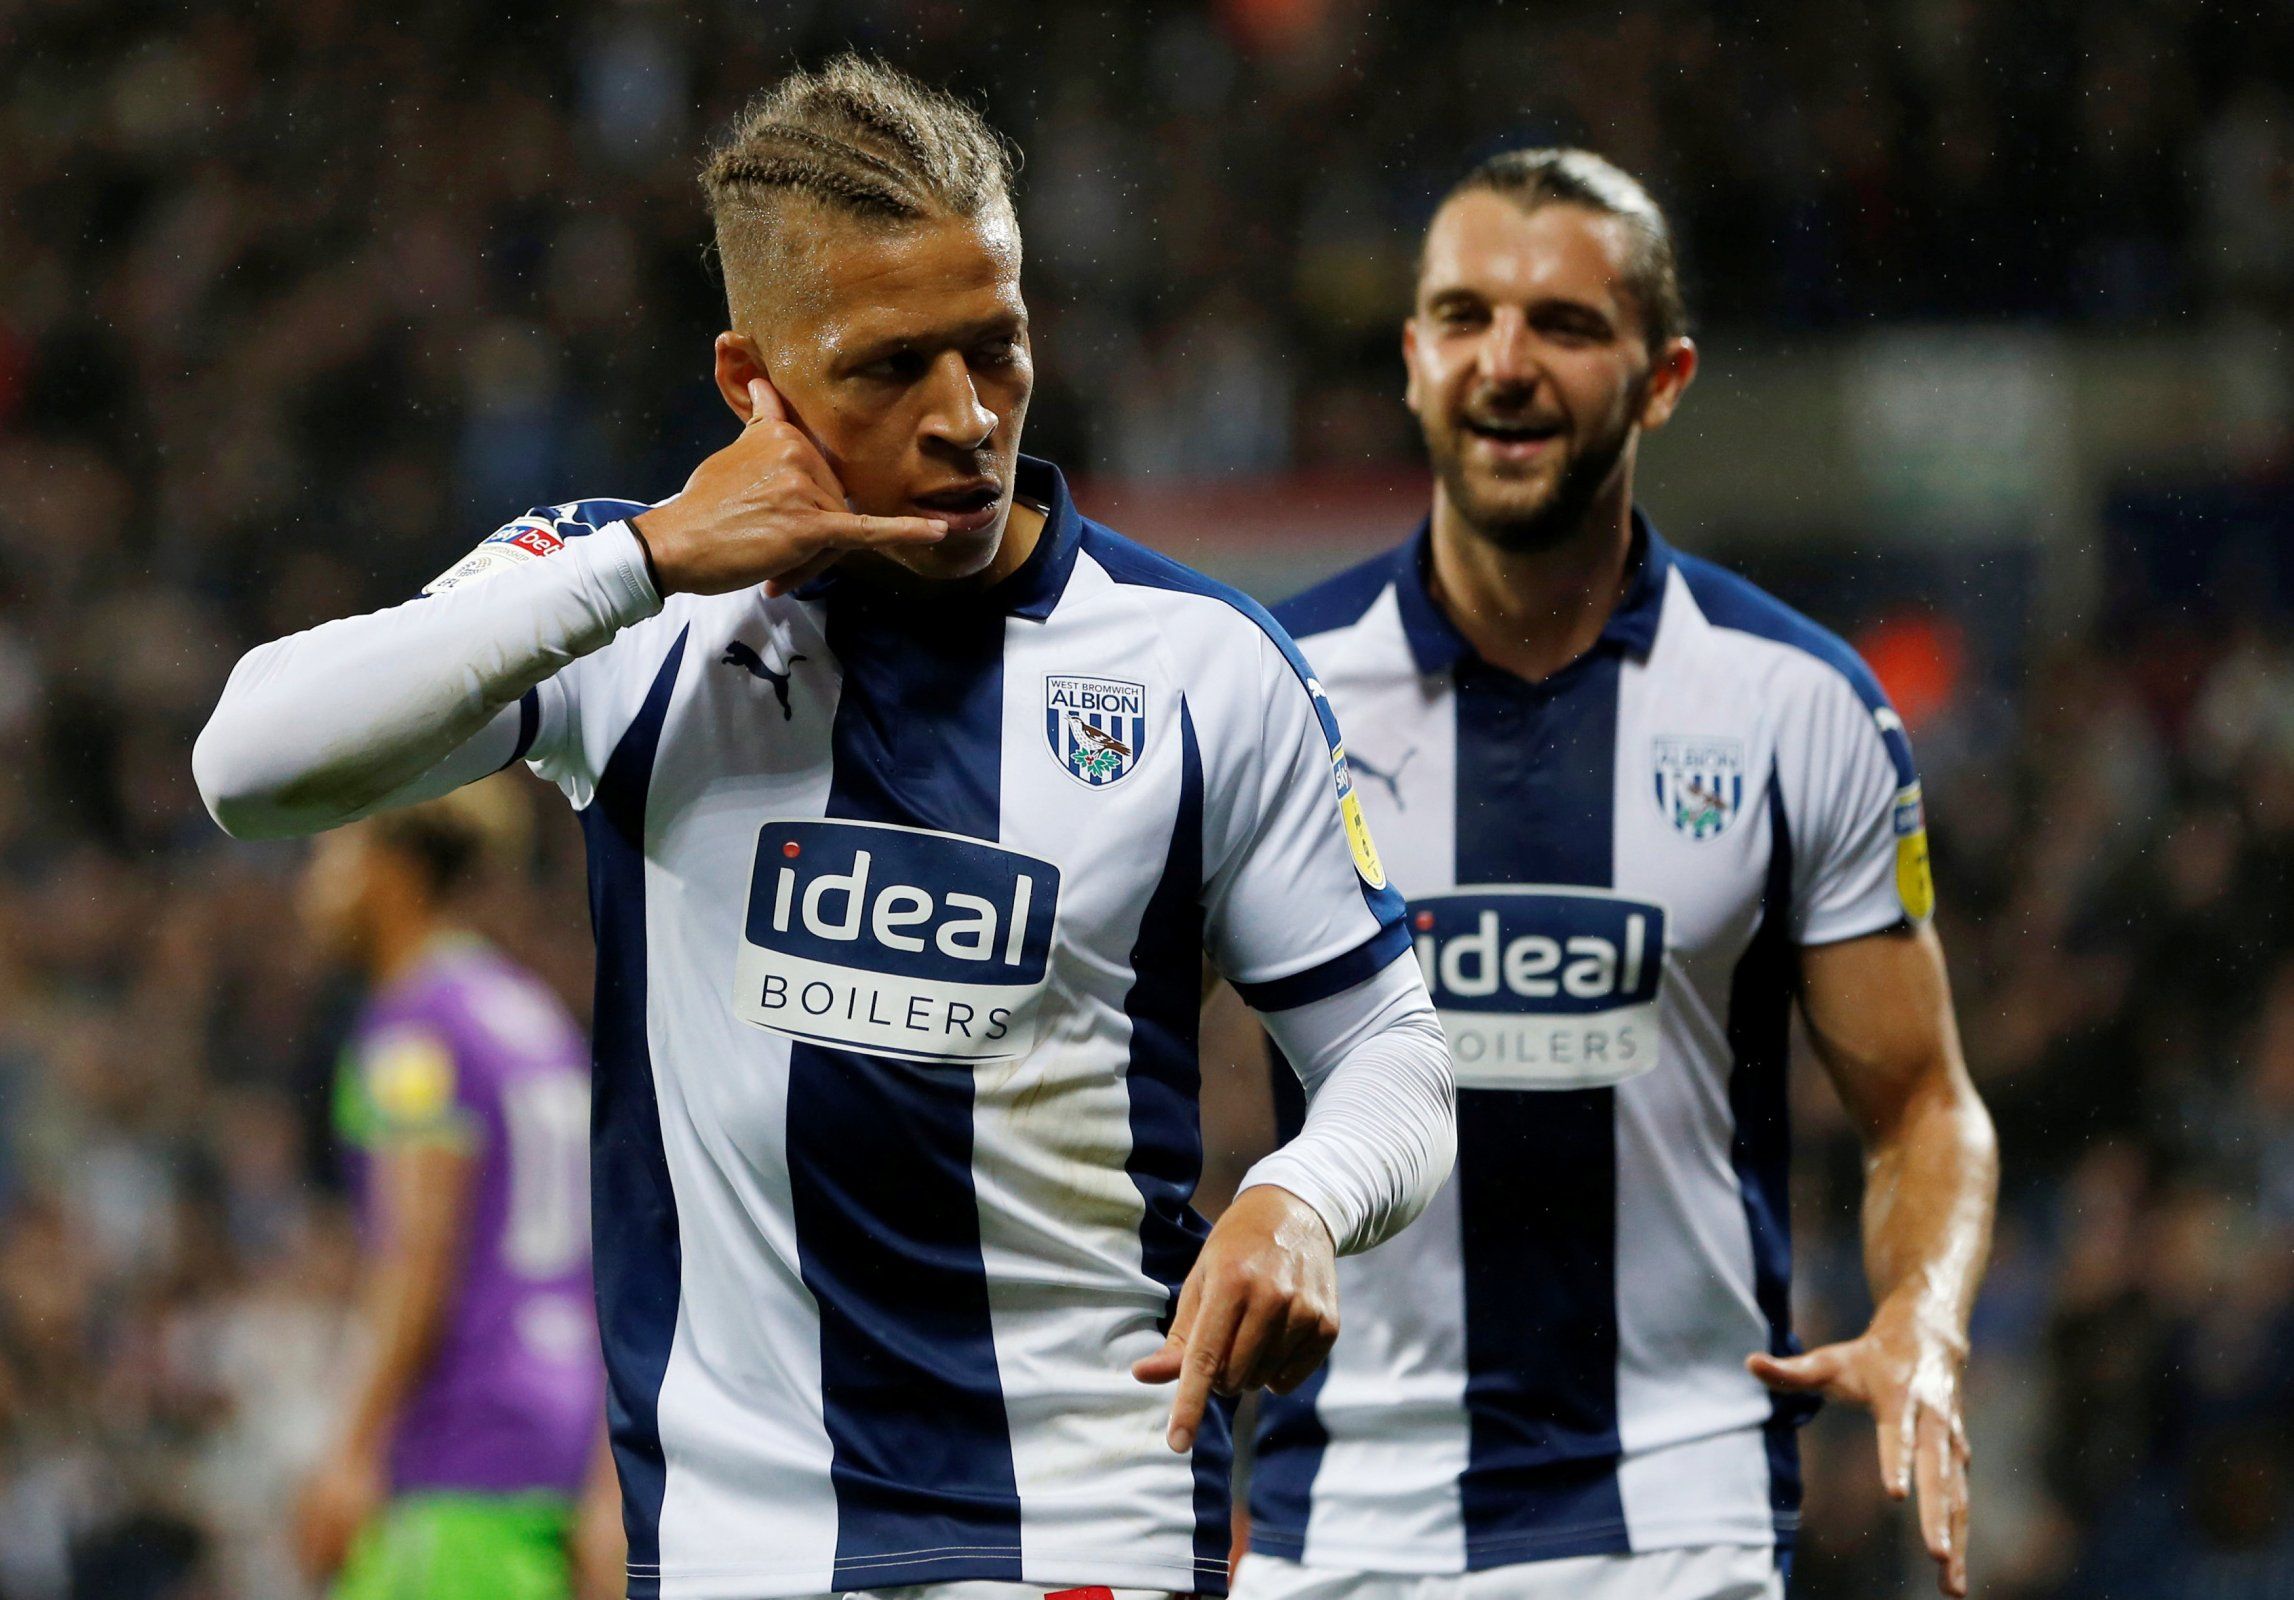 Dwight Gayle celebrates for West Brom